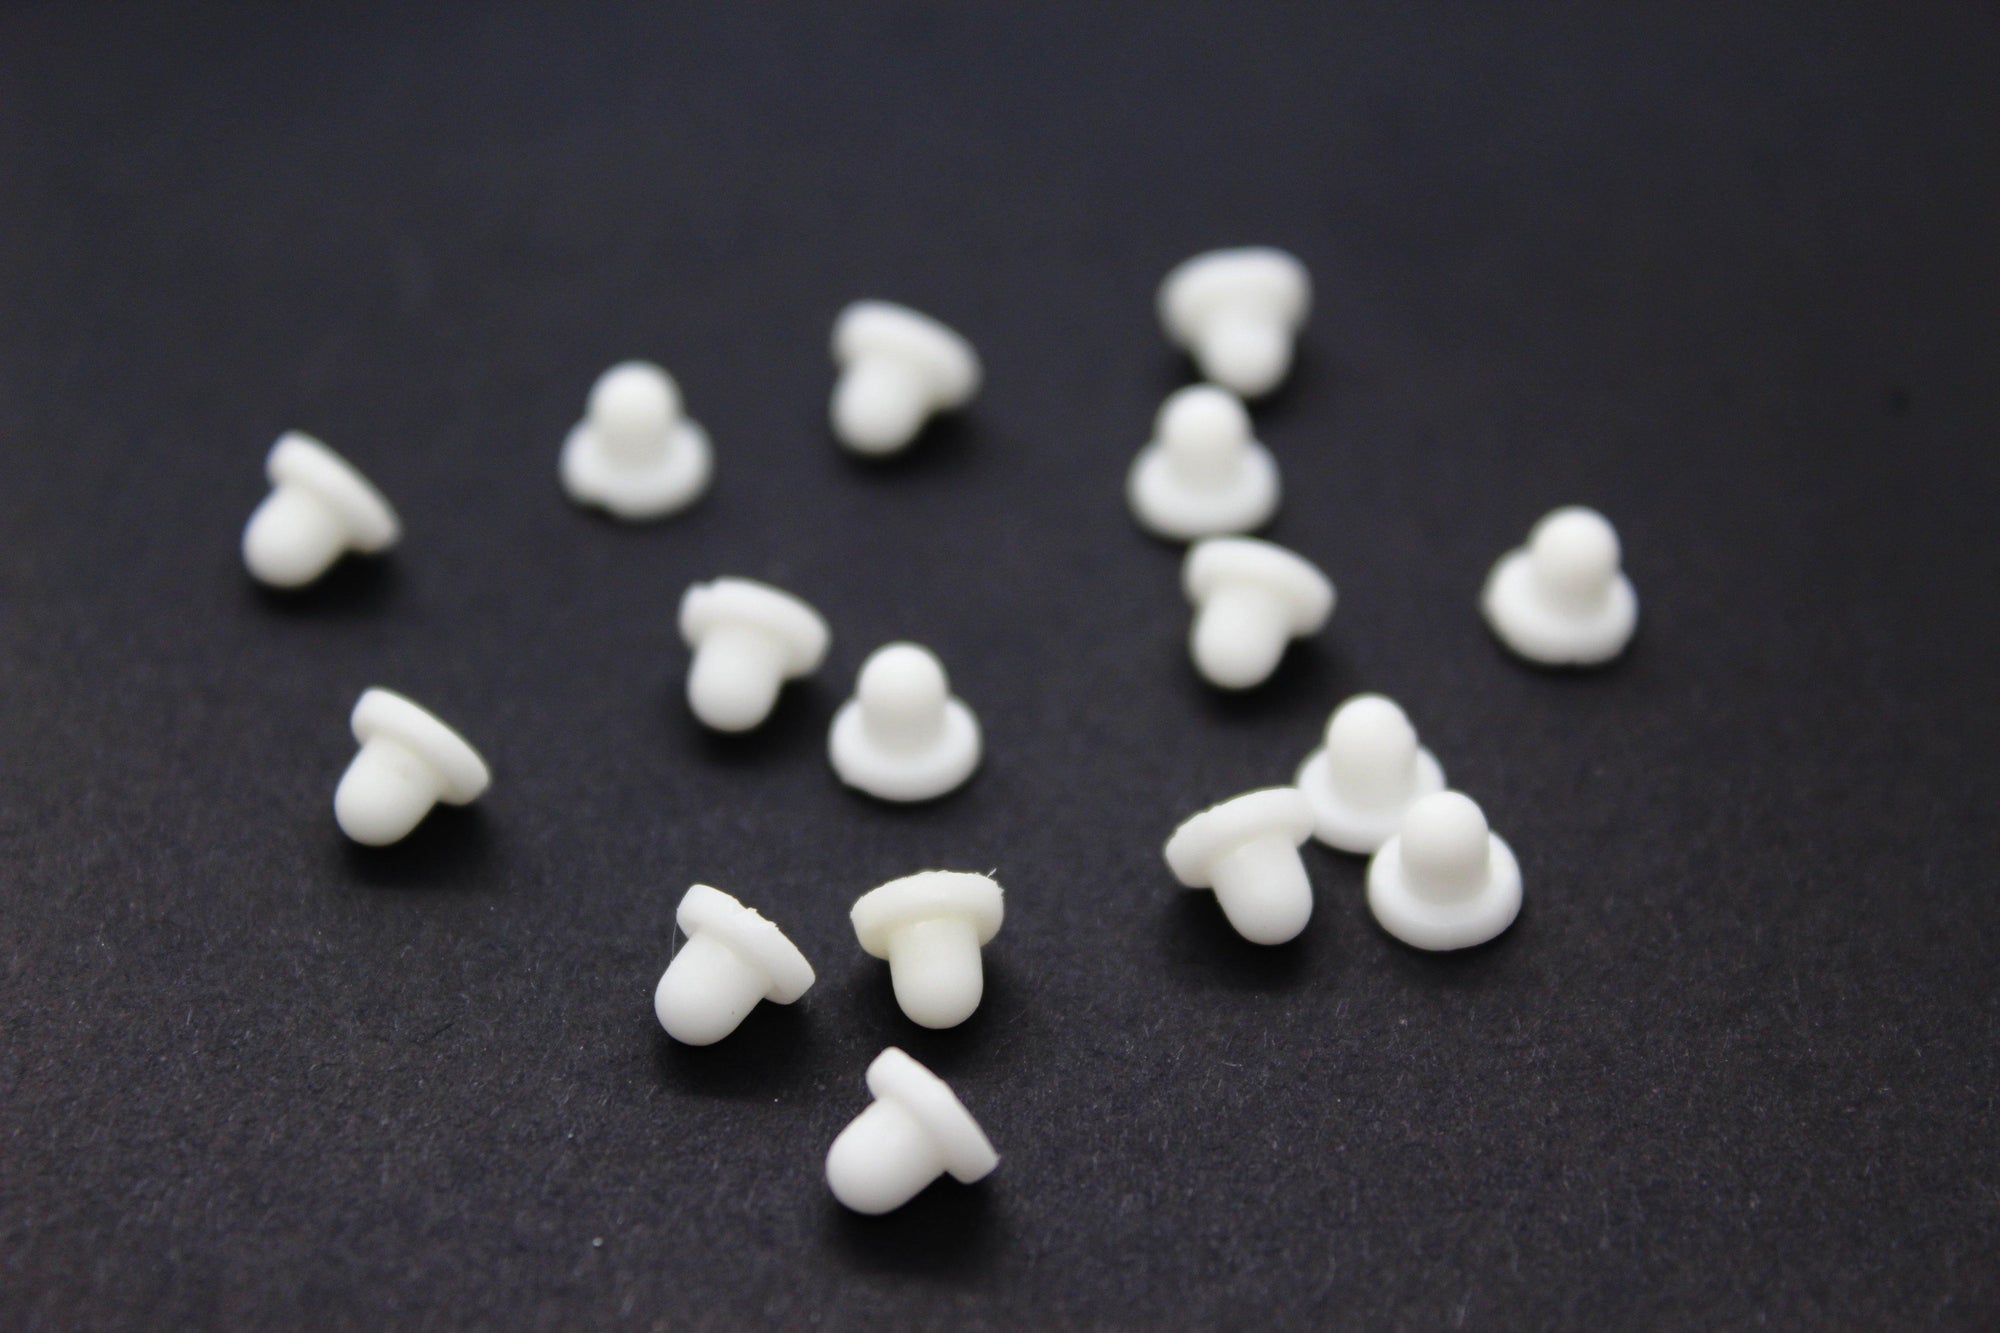 Backings, White Silicon, Comfort Discs, 5mm x 6mm, sold per pkg of 32 - Butterfly Beads